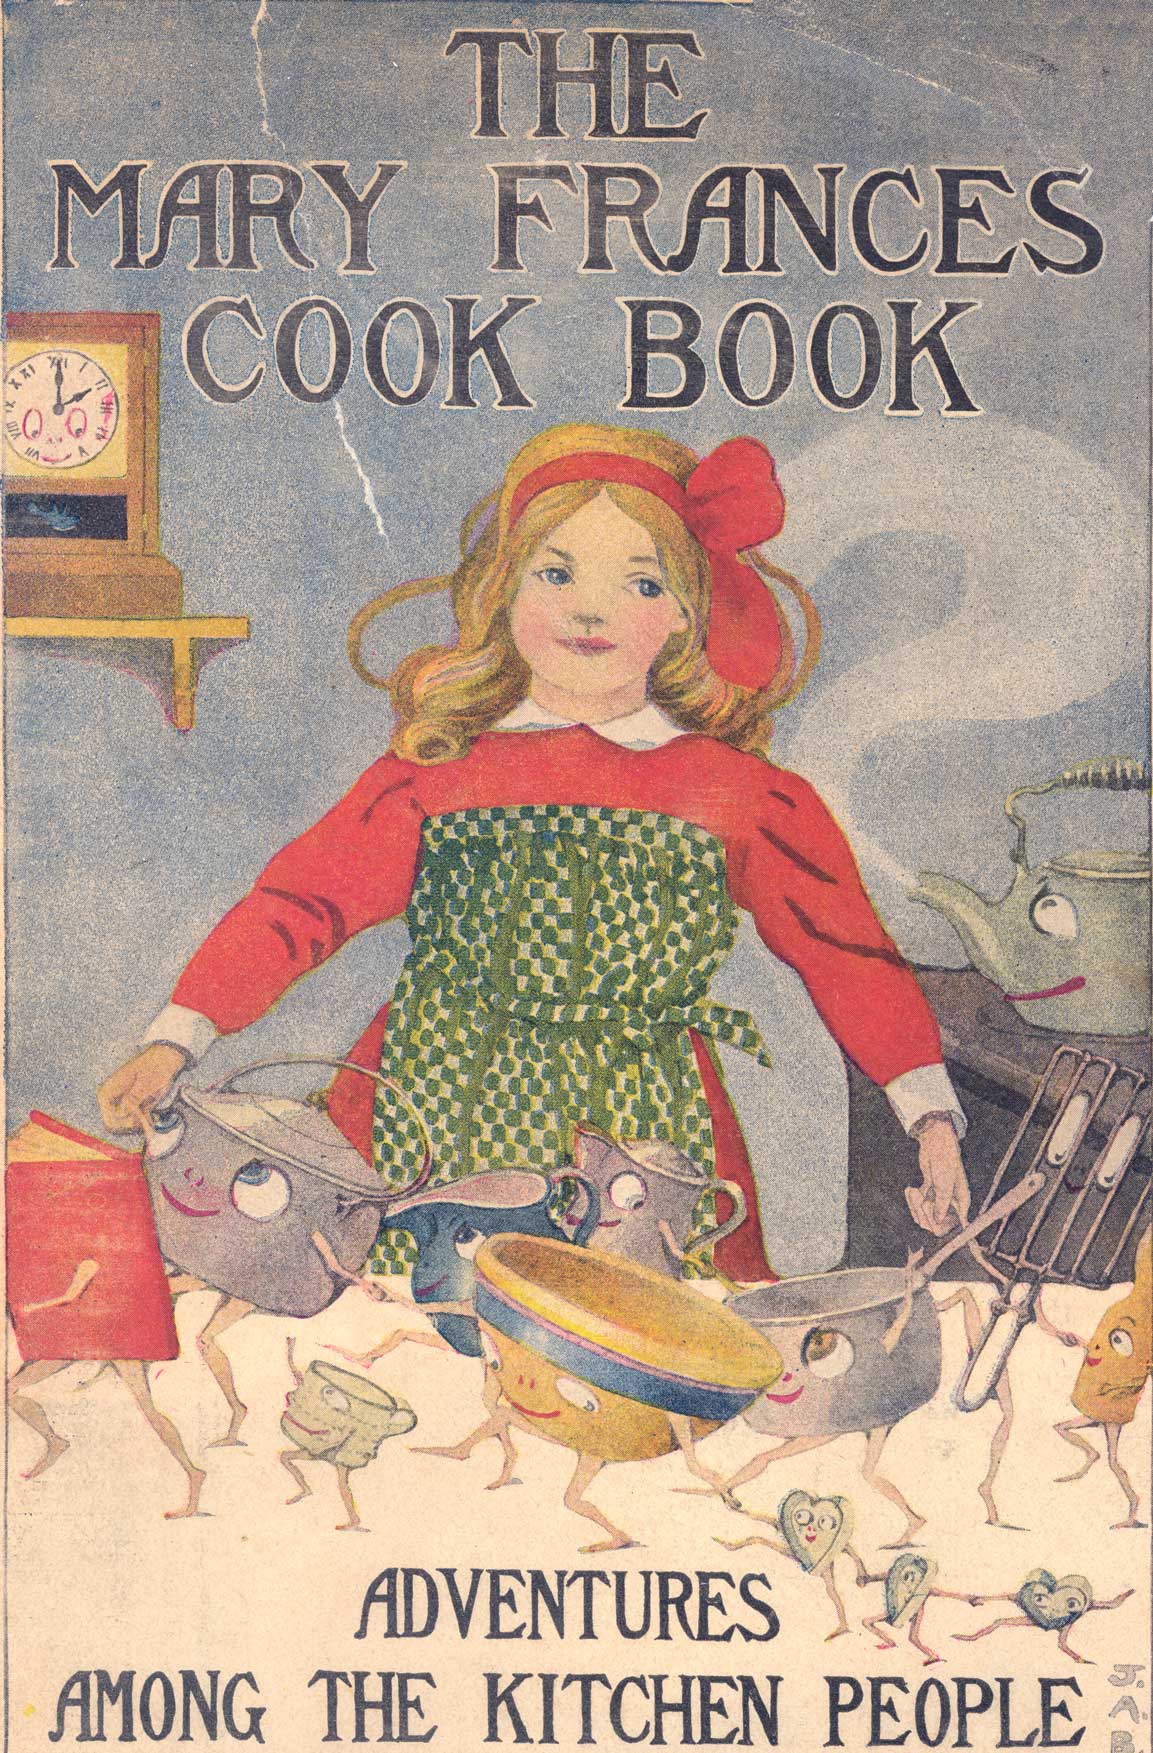 The Mary Frances cook book : or, Adventures among the kitchen people